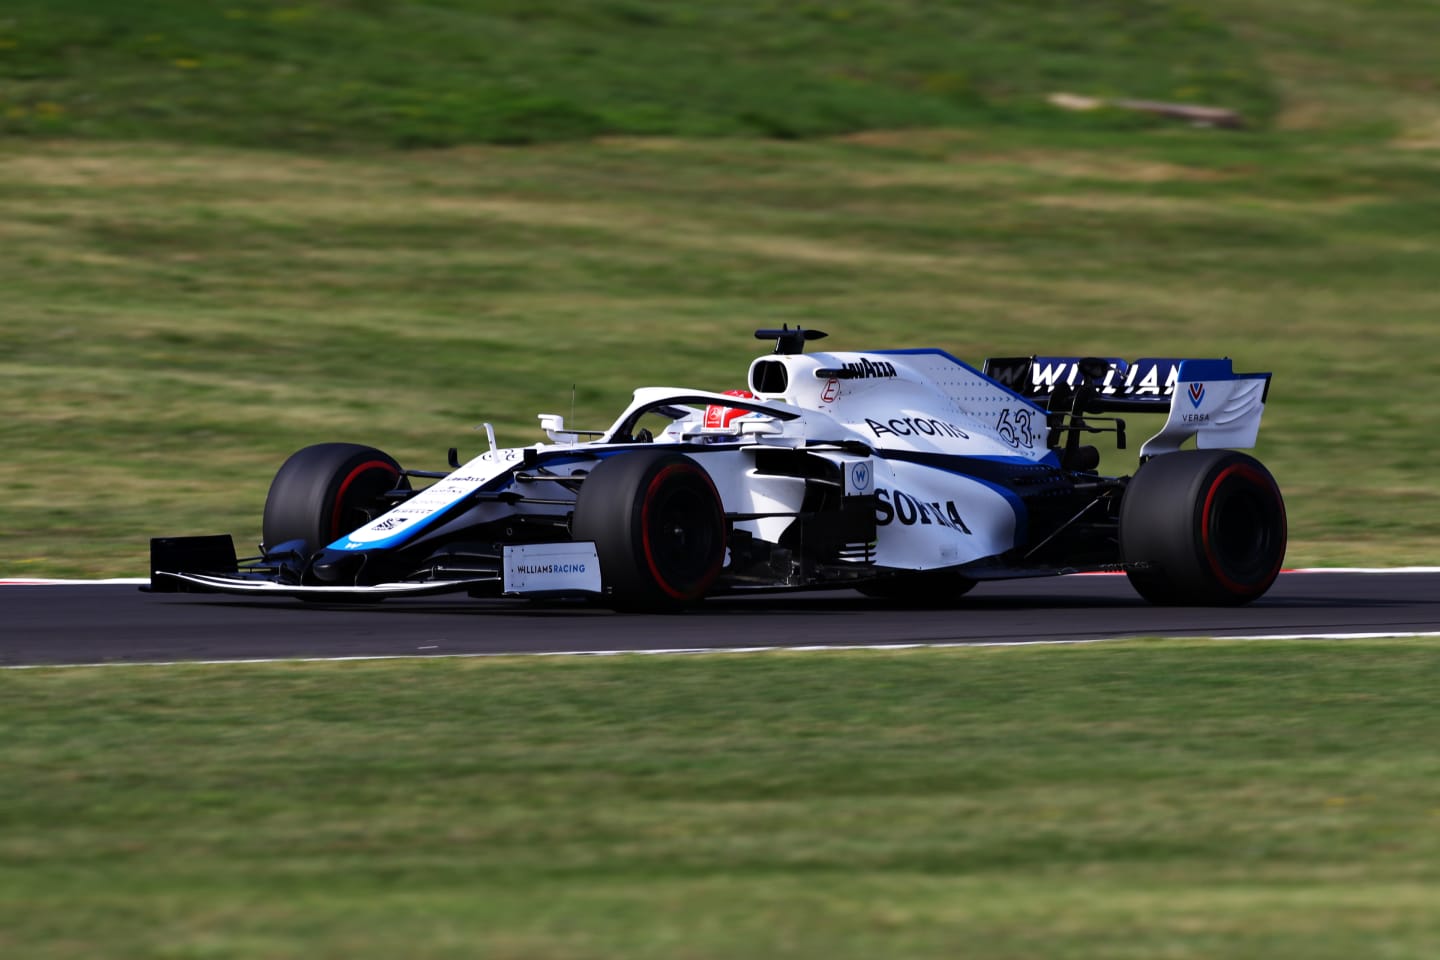 SCARPERIA, ITALY - SEPTEMBER 11: George Russell of Great Britain driving the (63) Williams Racing FW43 Mercedes on track during practice ahead of the F1 Grand Prix of Tuscany at Mugello Circuit on September 11, 2020 in Scarperia, Italy. (Photo by Mark Thompson/Getty Images)